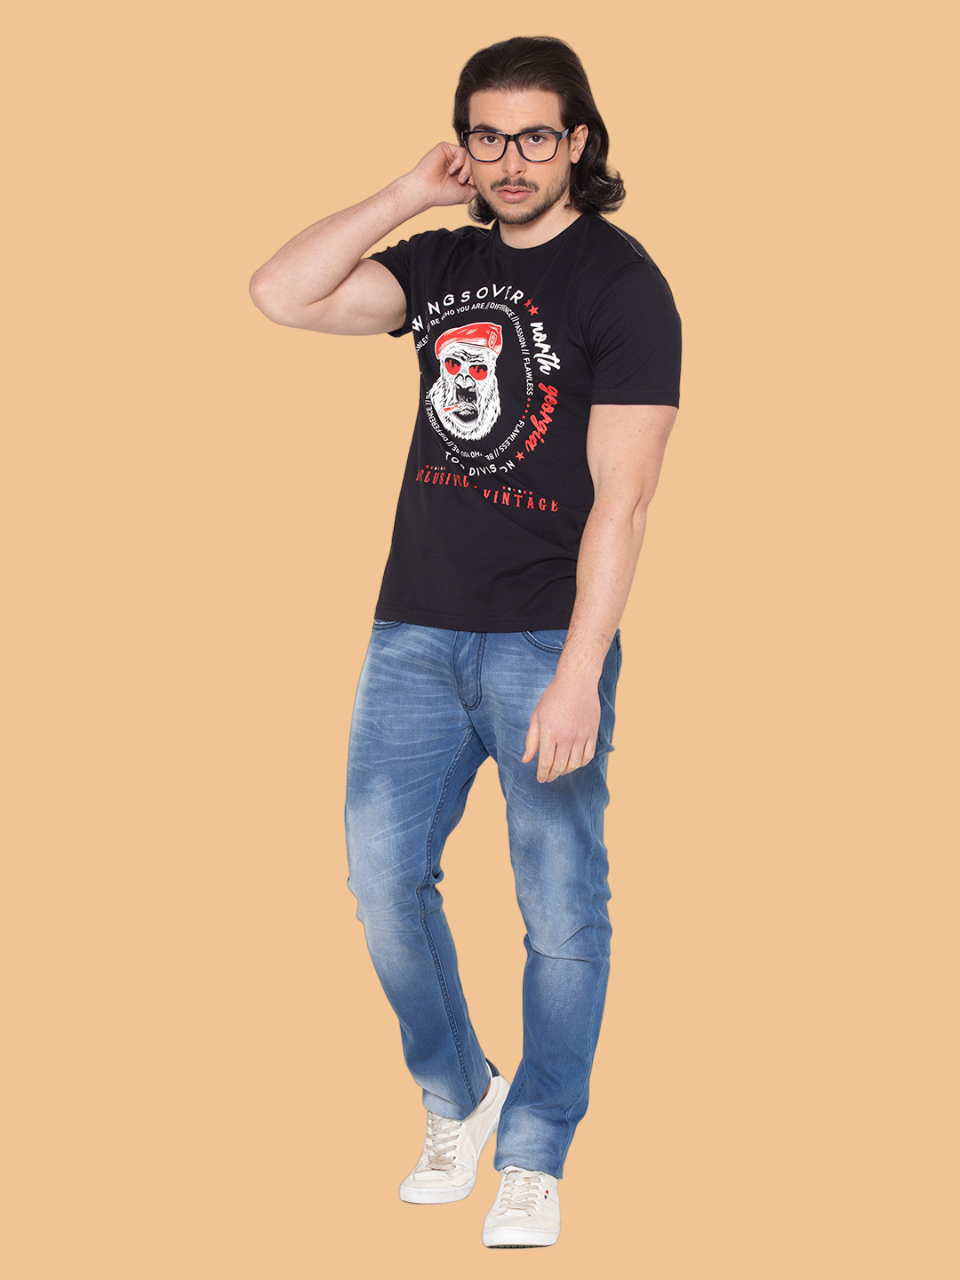 Flawless Men's Black T-Shirt in Soft Cotton Being Flawless